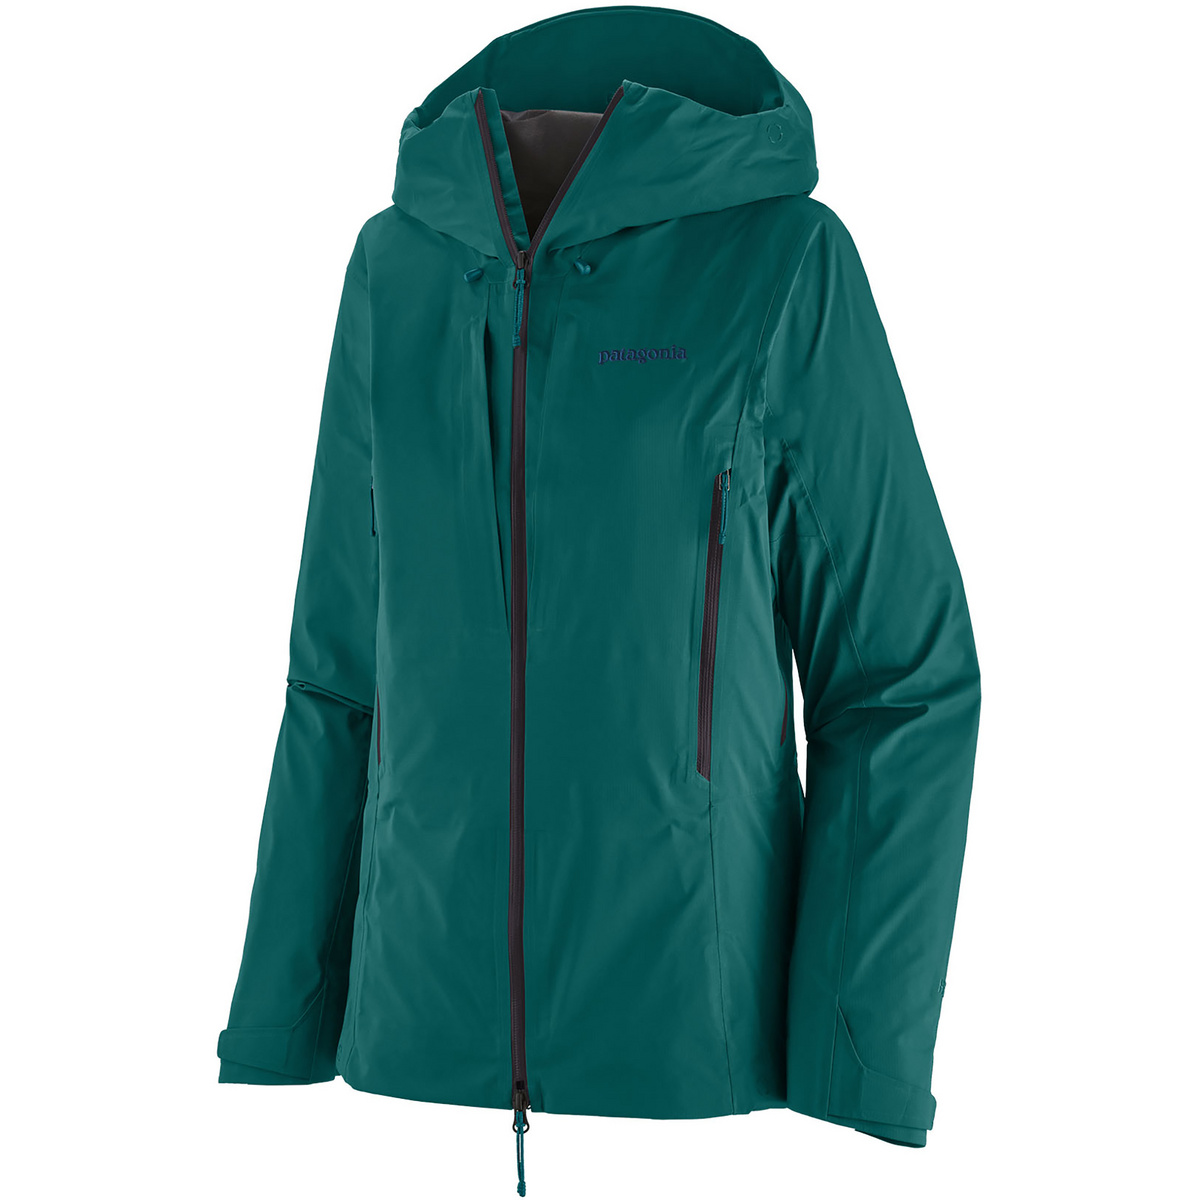 Image of Patagonia Donna Giacca Aspect Dual